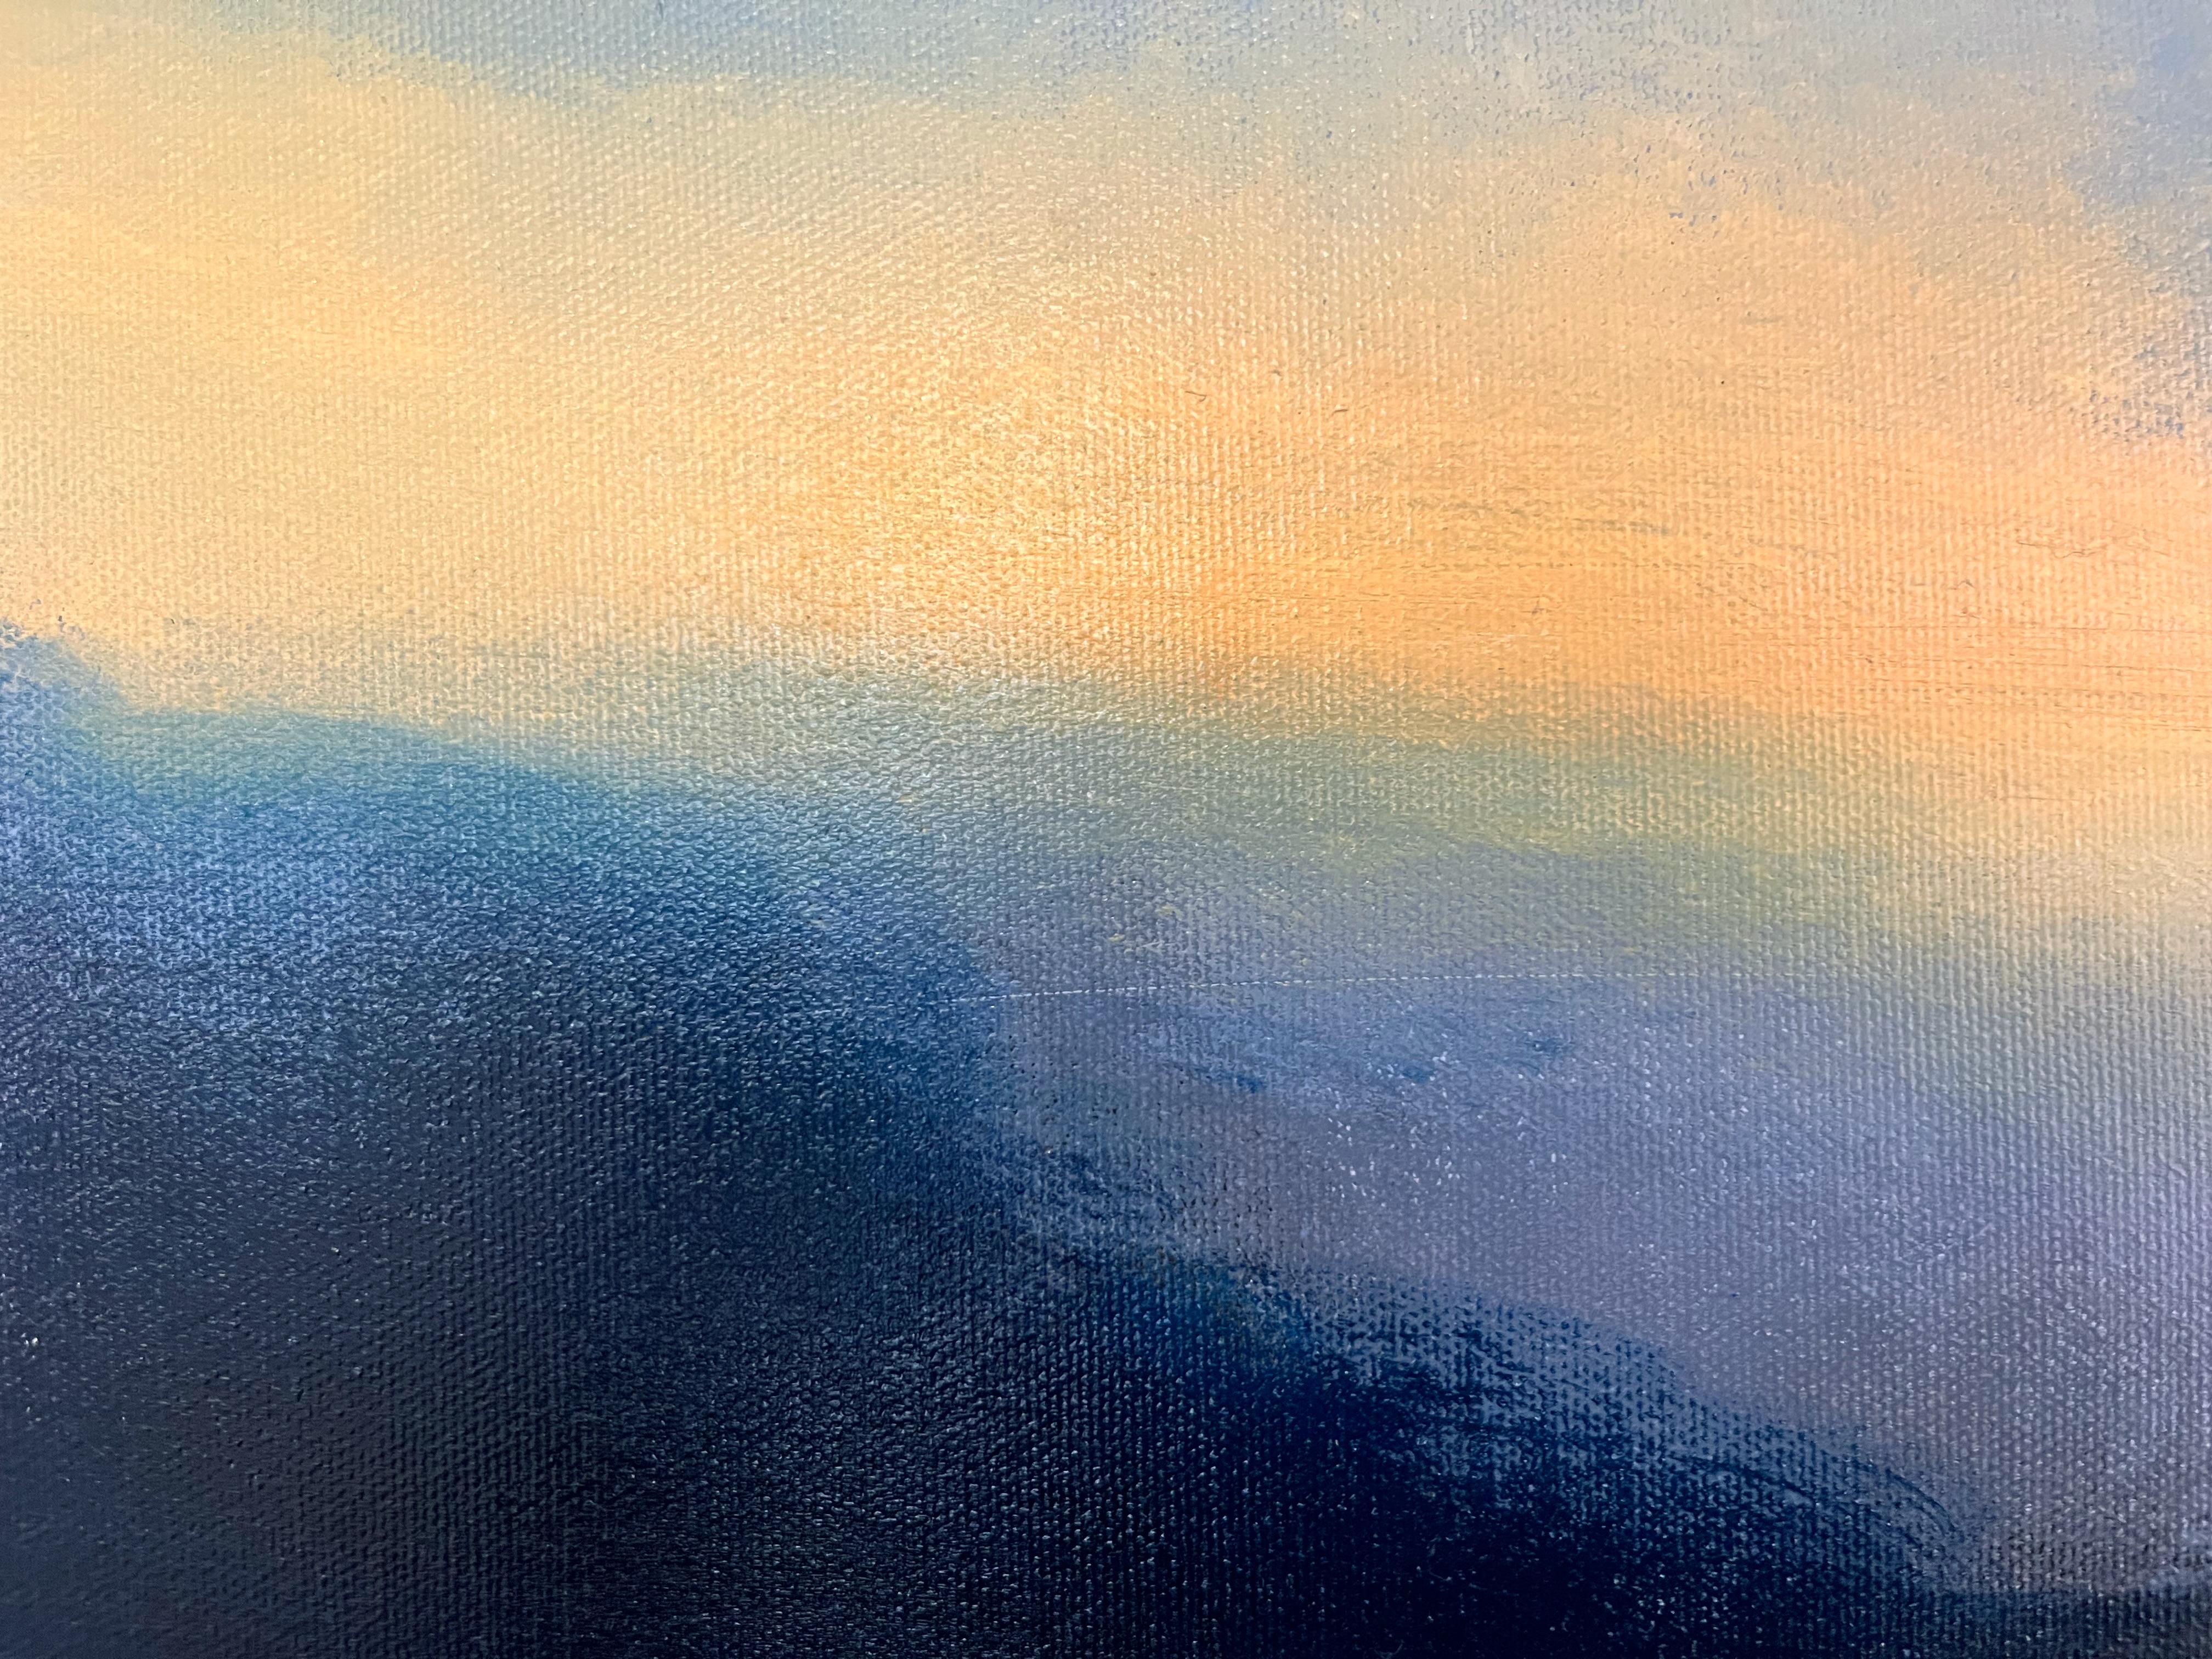 Light in the Cloud, 30x40